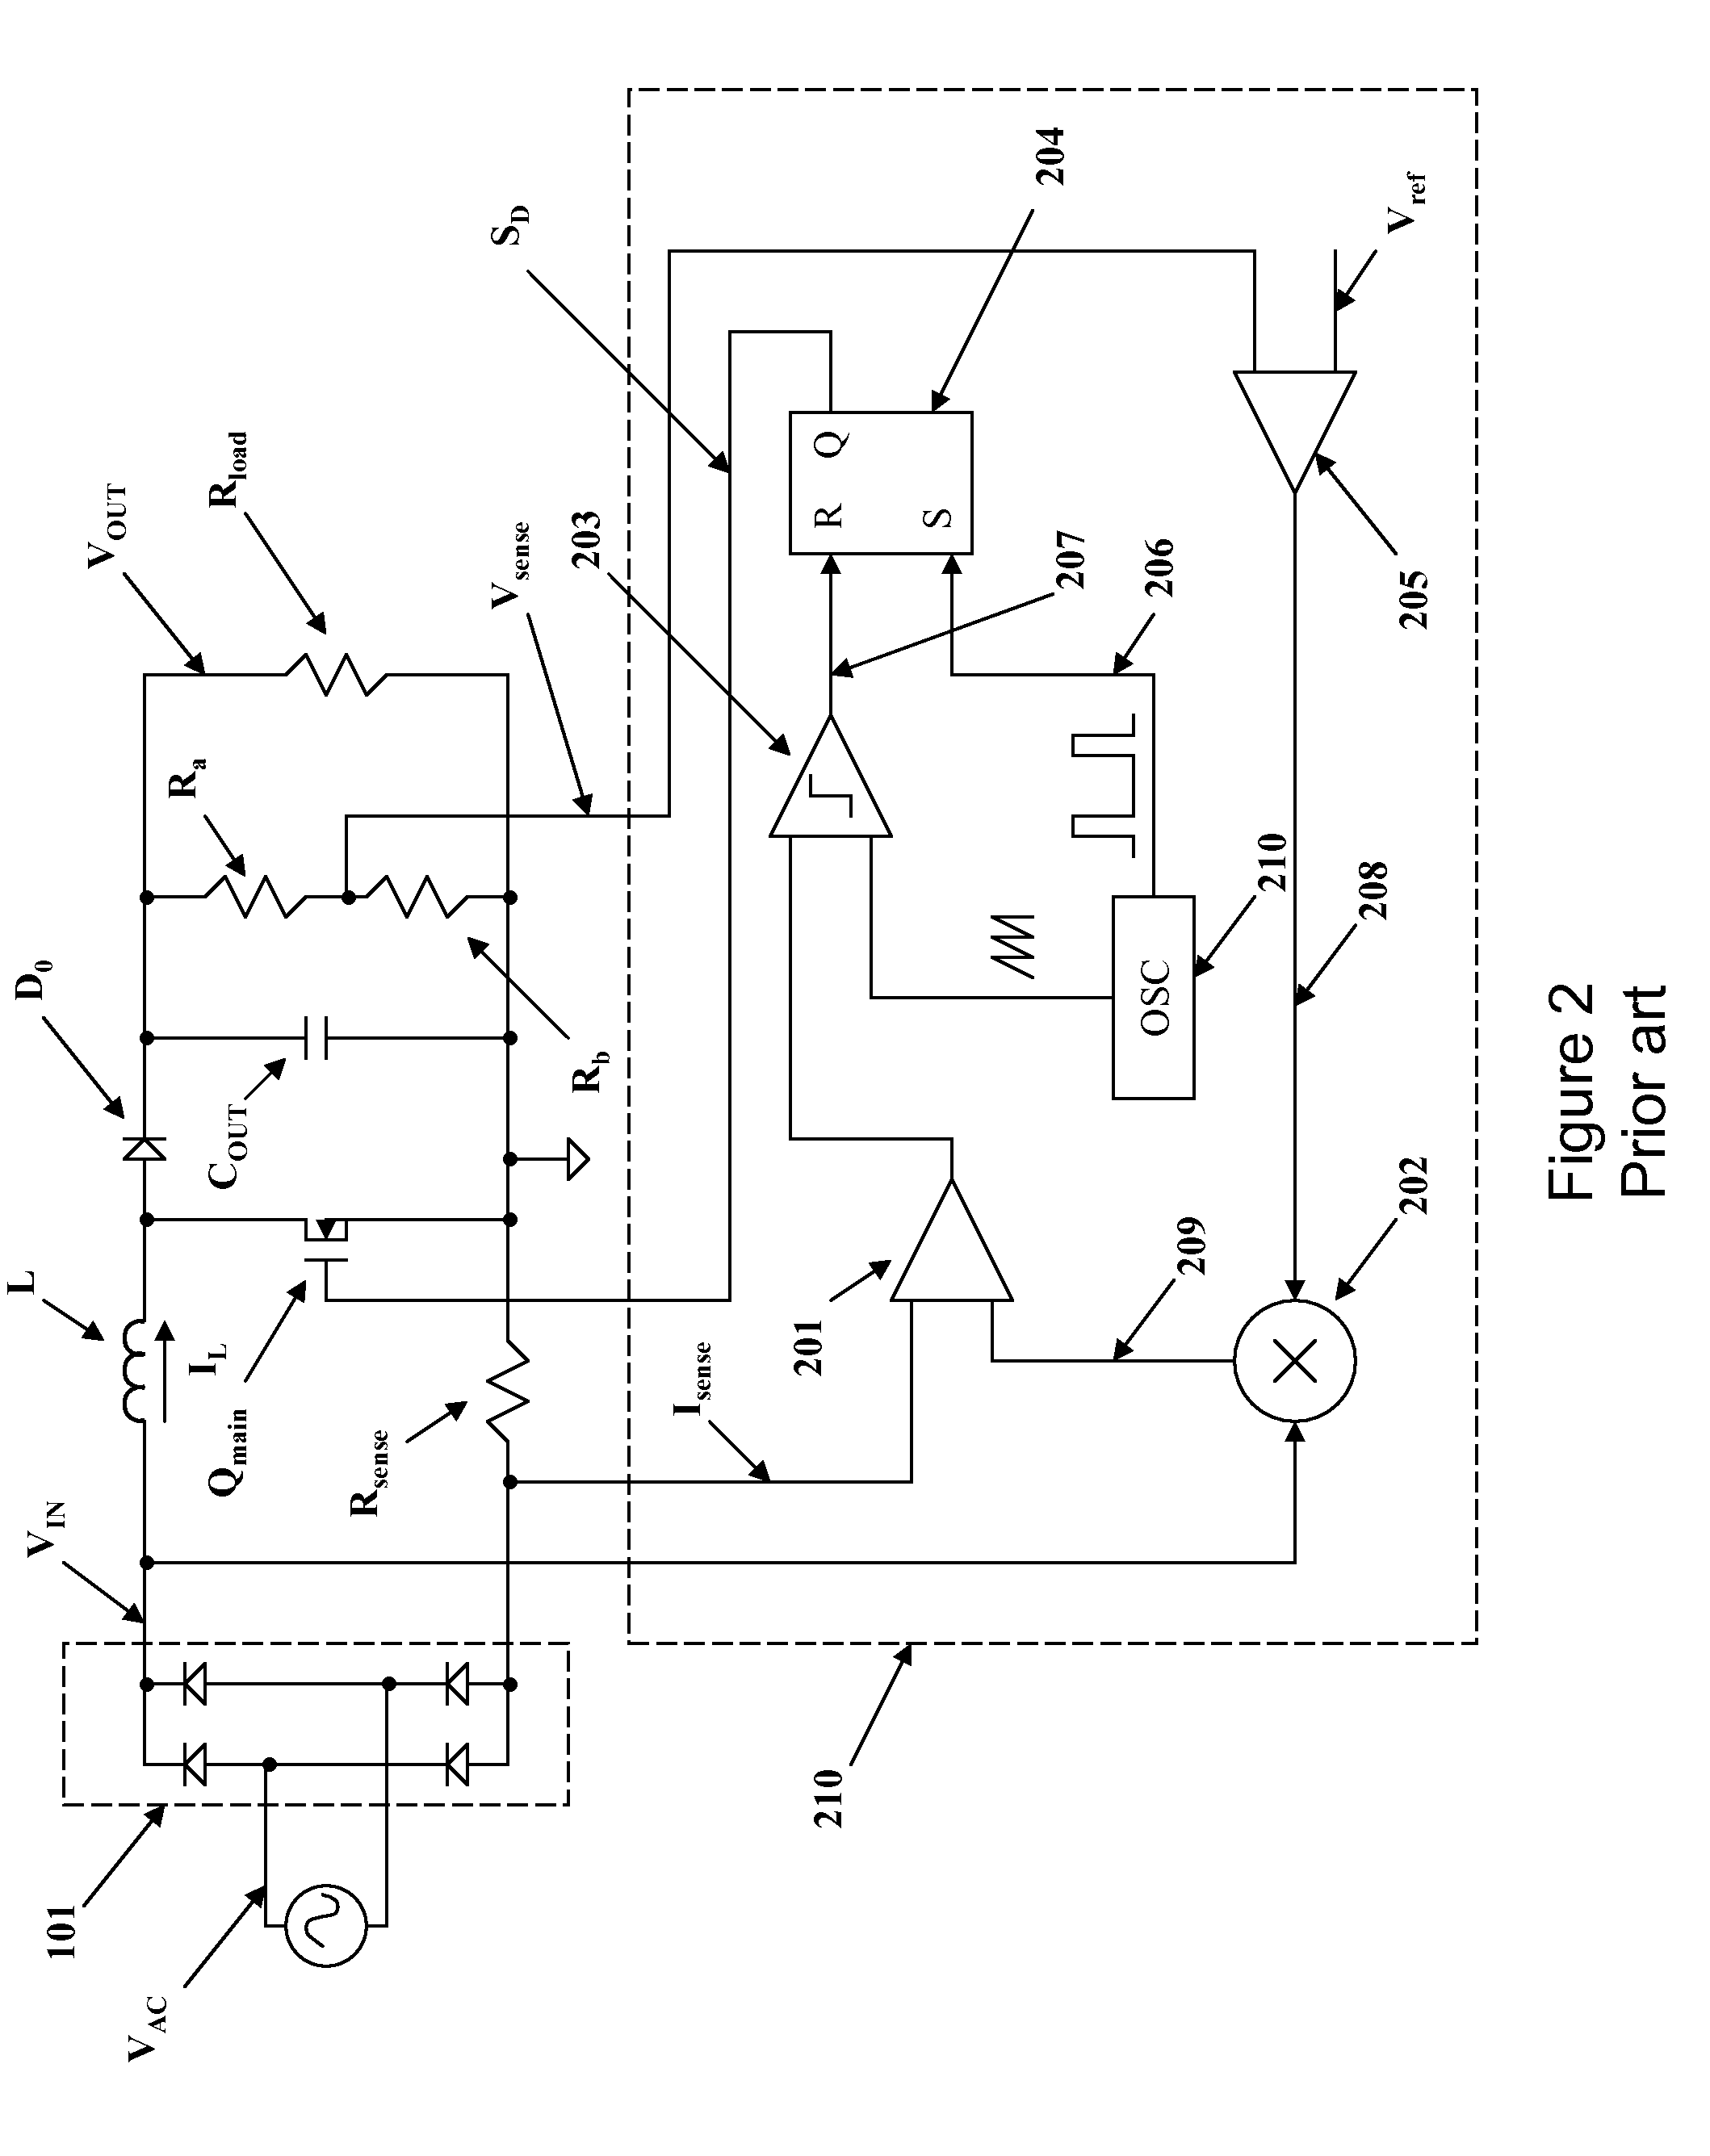 Utilization of a multifunctional pin combining voltage sensing and zero current detection to control a switched-mode power converter